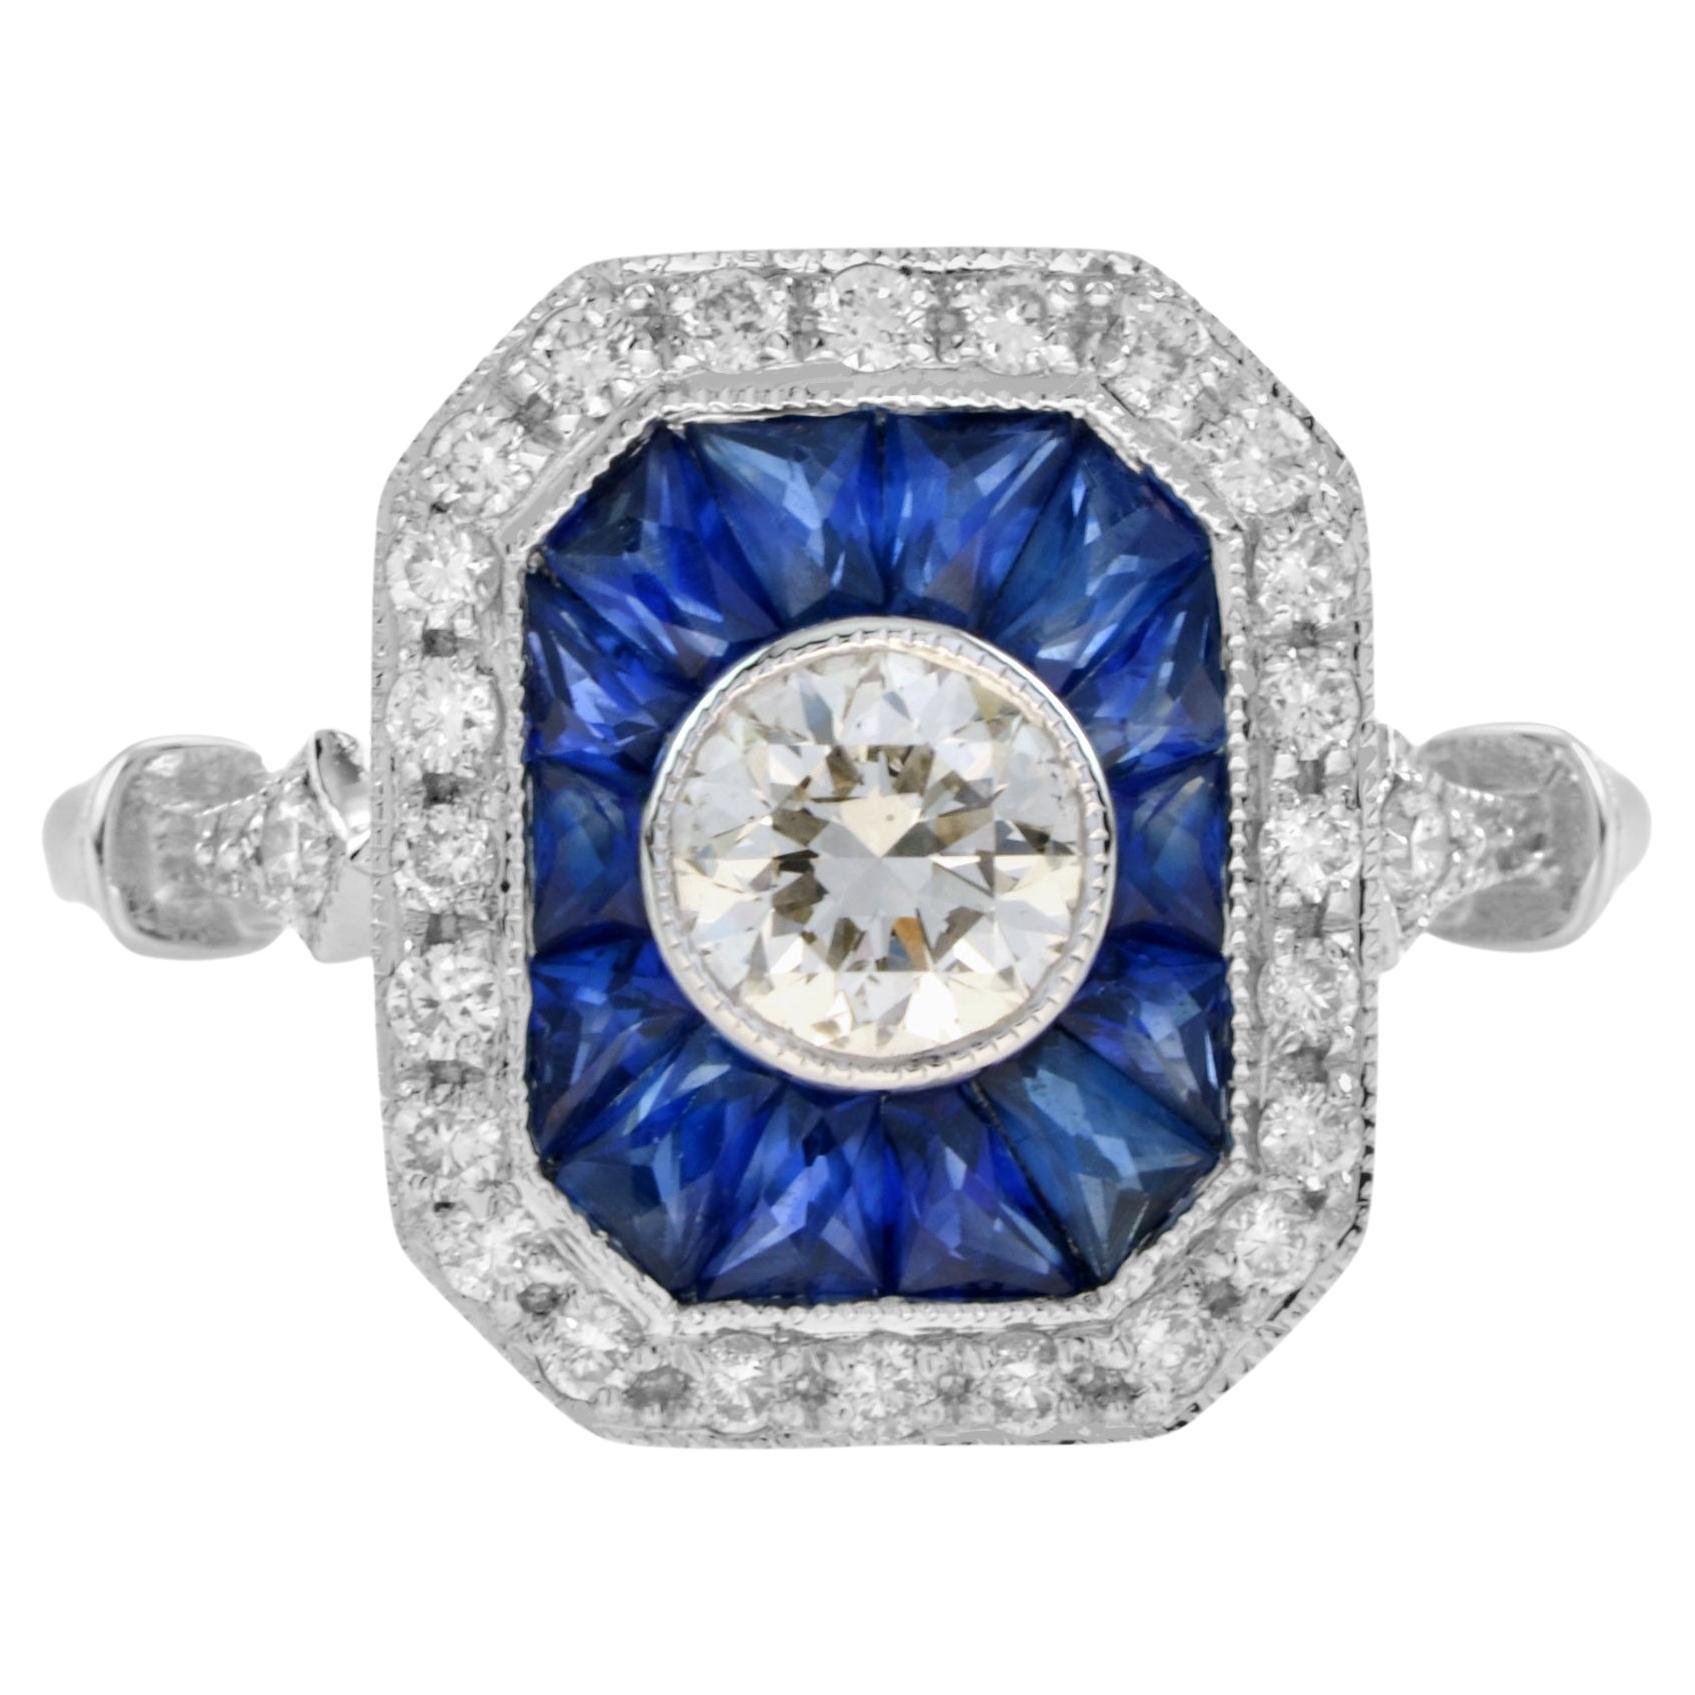 For Sale:  Diamond and Sapphire Art Deco Style Engagement Ring in 18k White Gold